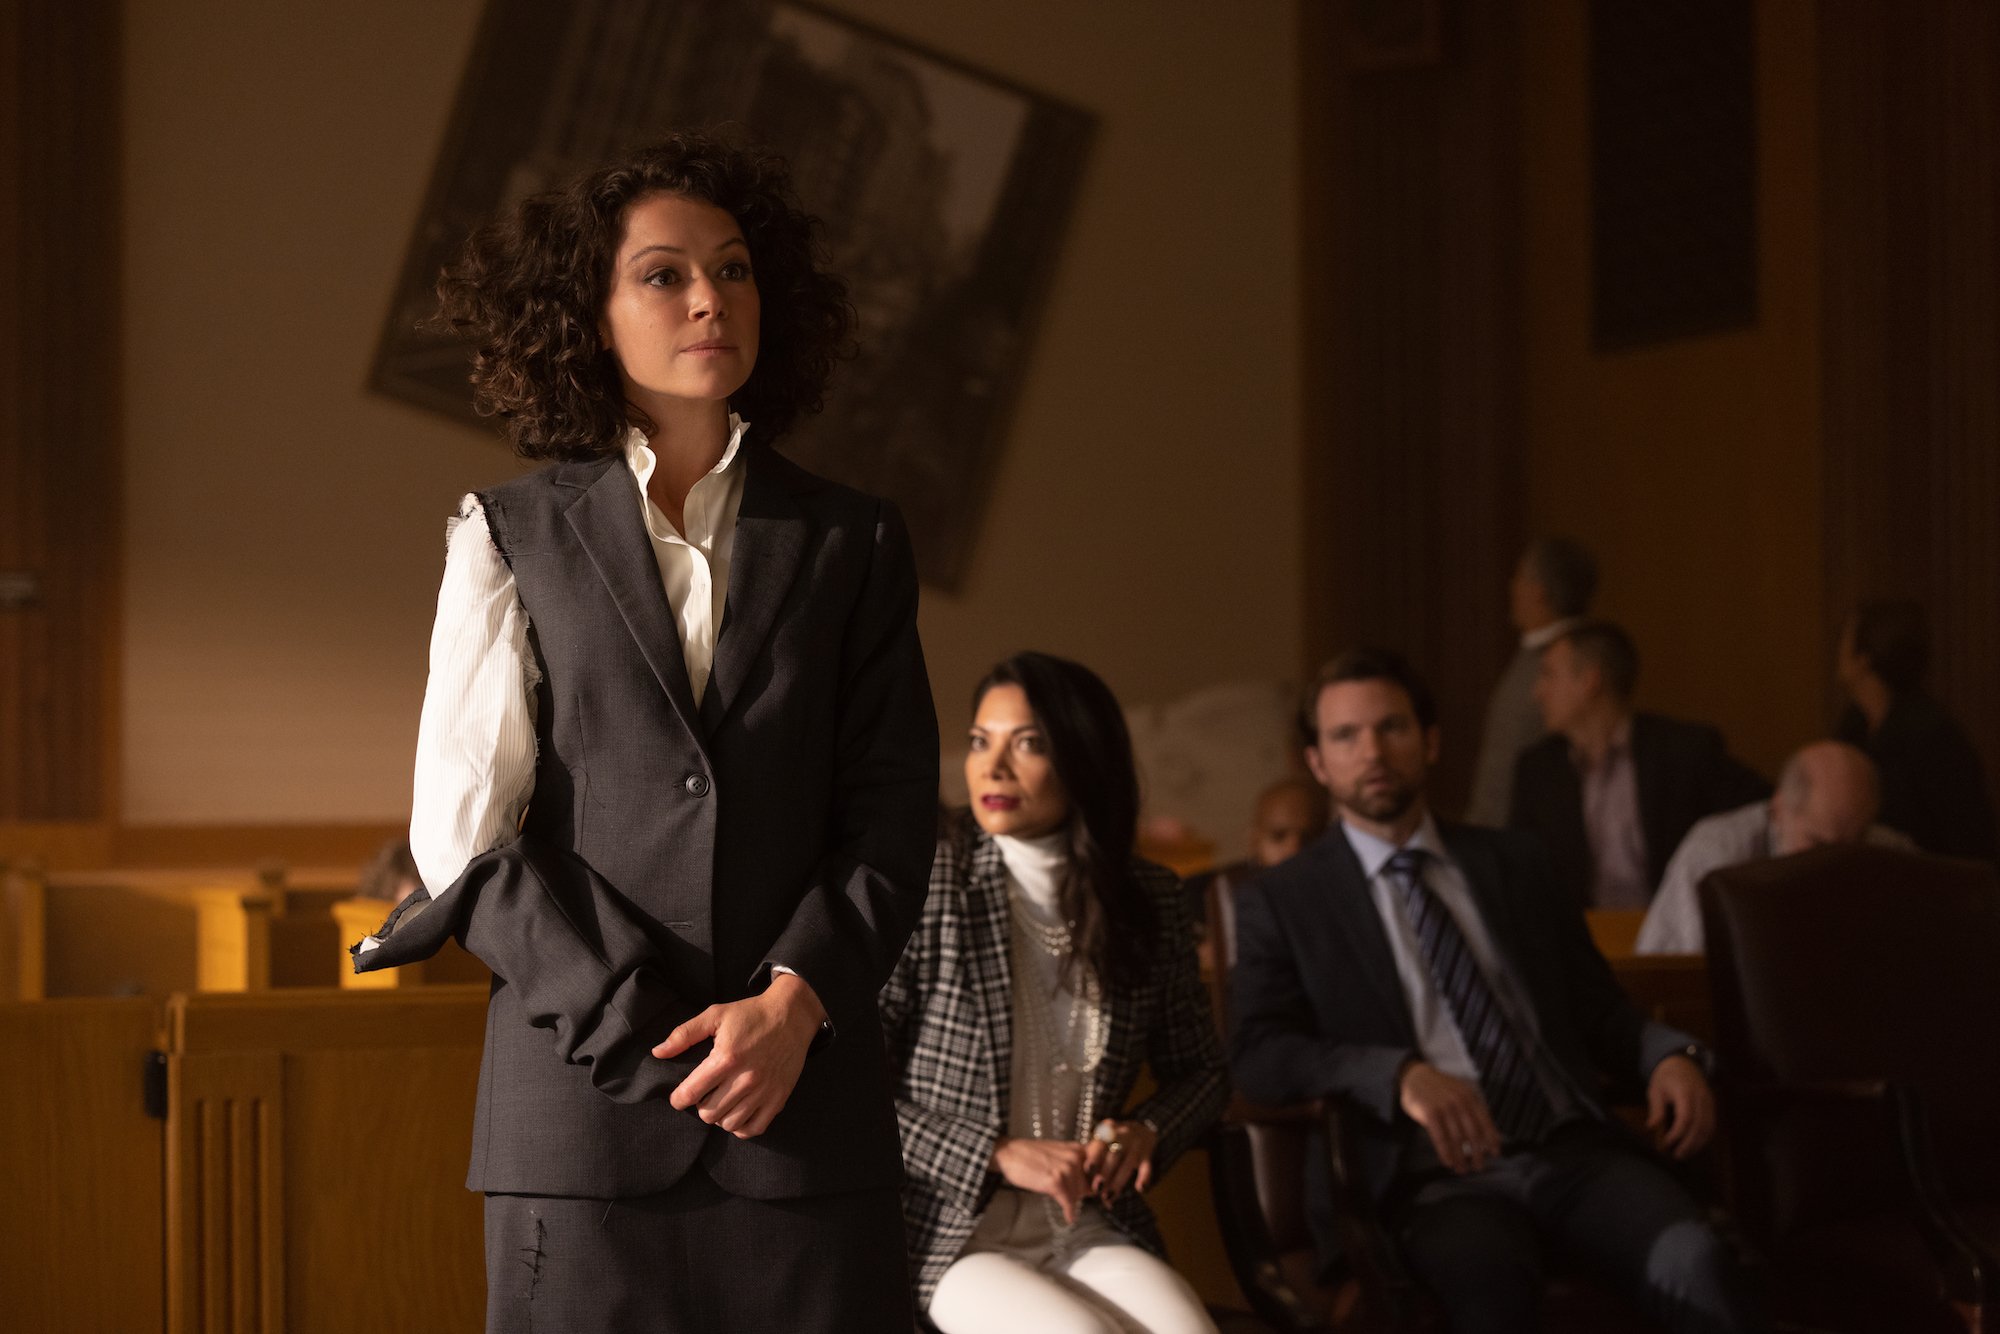 Tatiana Maslany, in character as Jennifer Walters in the 'She-Hulk: Attroney at Law' trailer, which teases Daredevil, wears a torn up gray suit over a white button-up shirt.